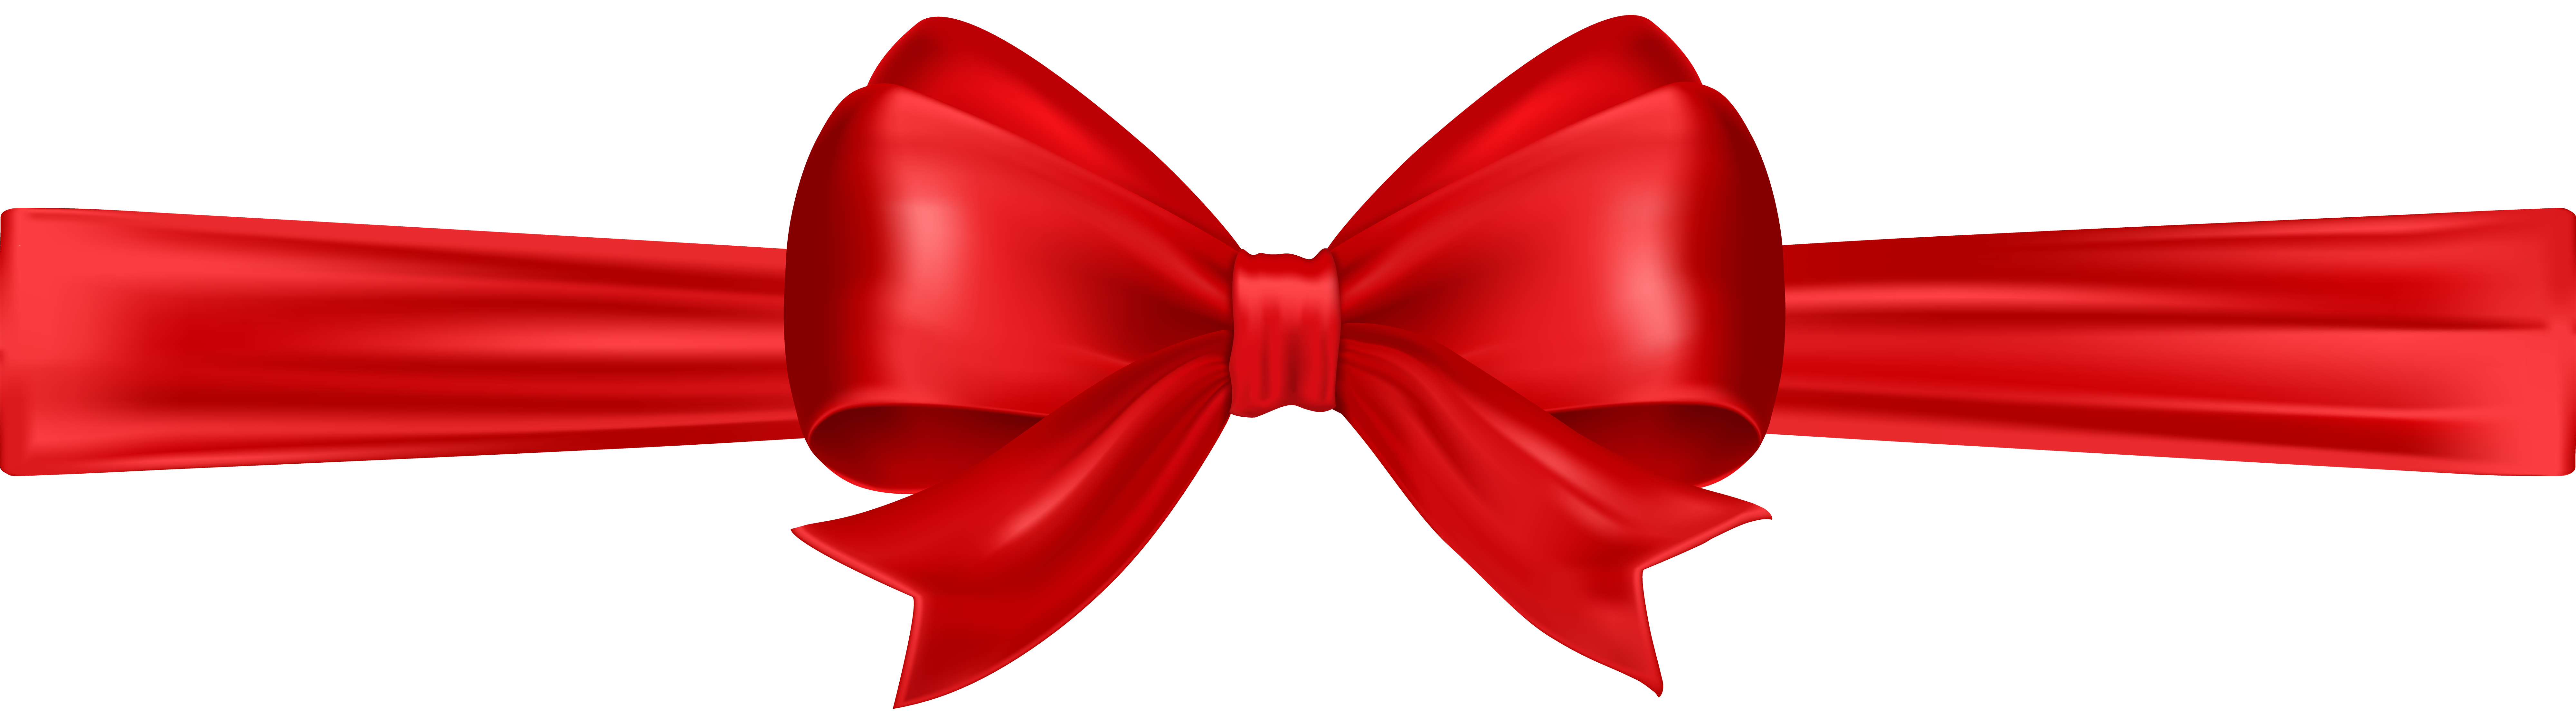 red ribbon bow PNG transparent image download, size: 1000x836px